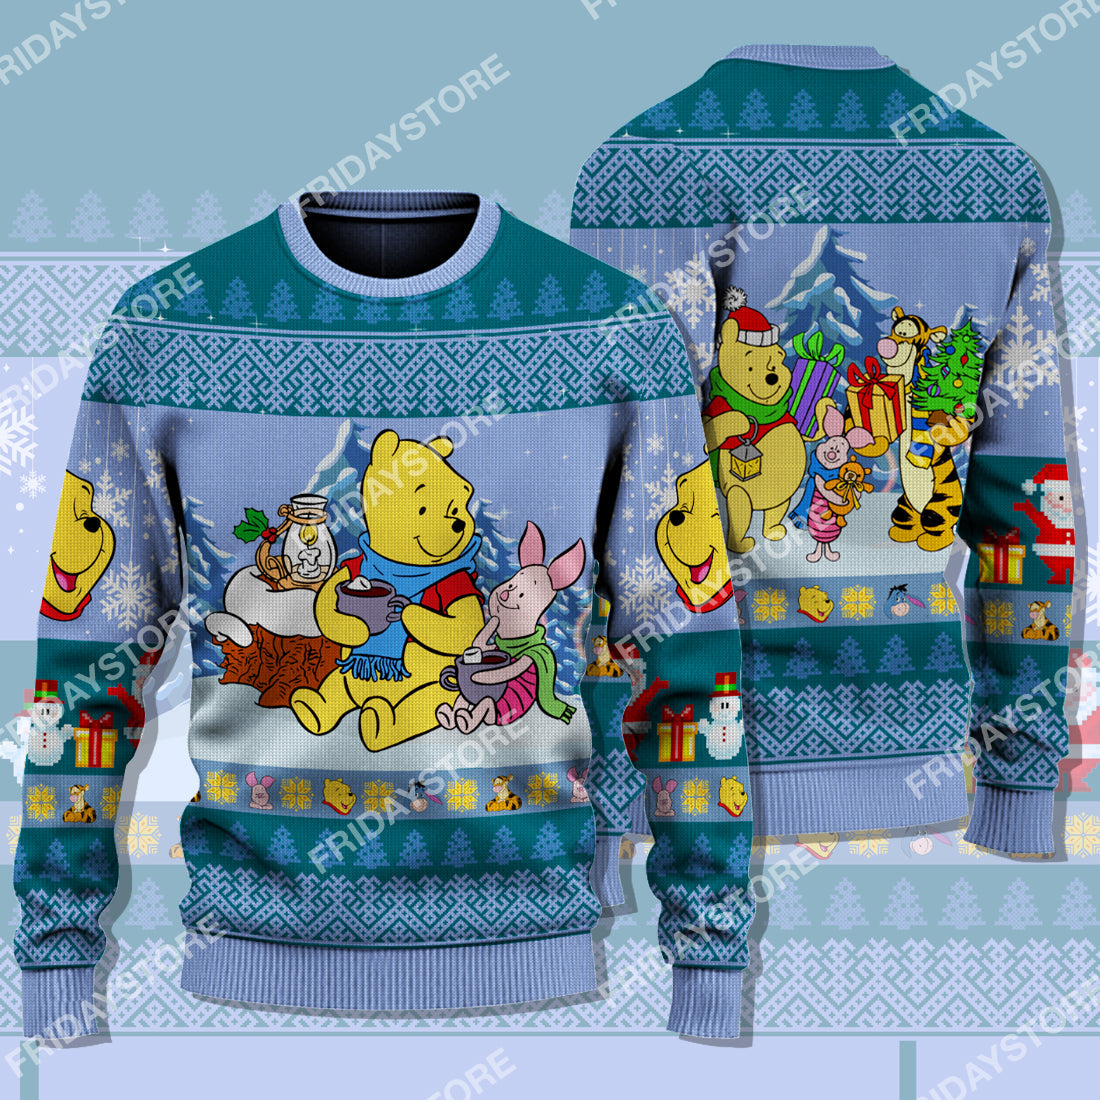 Disney ChristmasWTP Sweater Pooh And Piglet Hot Cocoa Christmas Ugly Sweater Cute High Quality Disney Winnie The Pooh Ugly Sweater 2022 1026